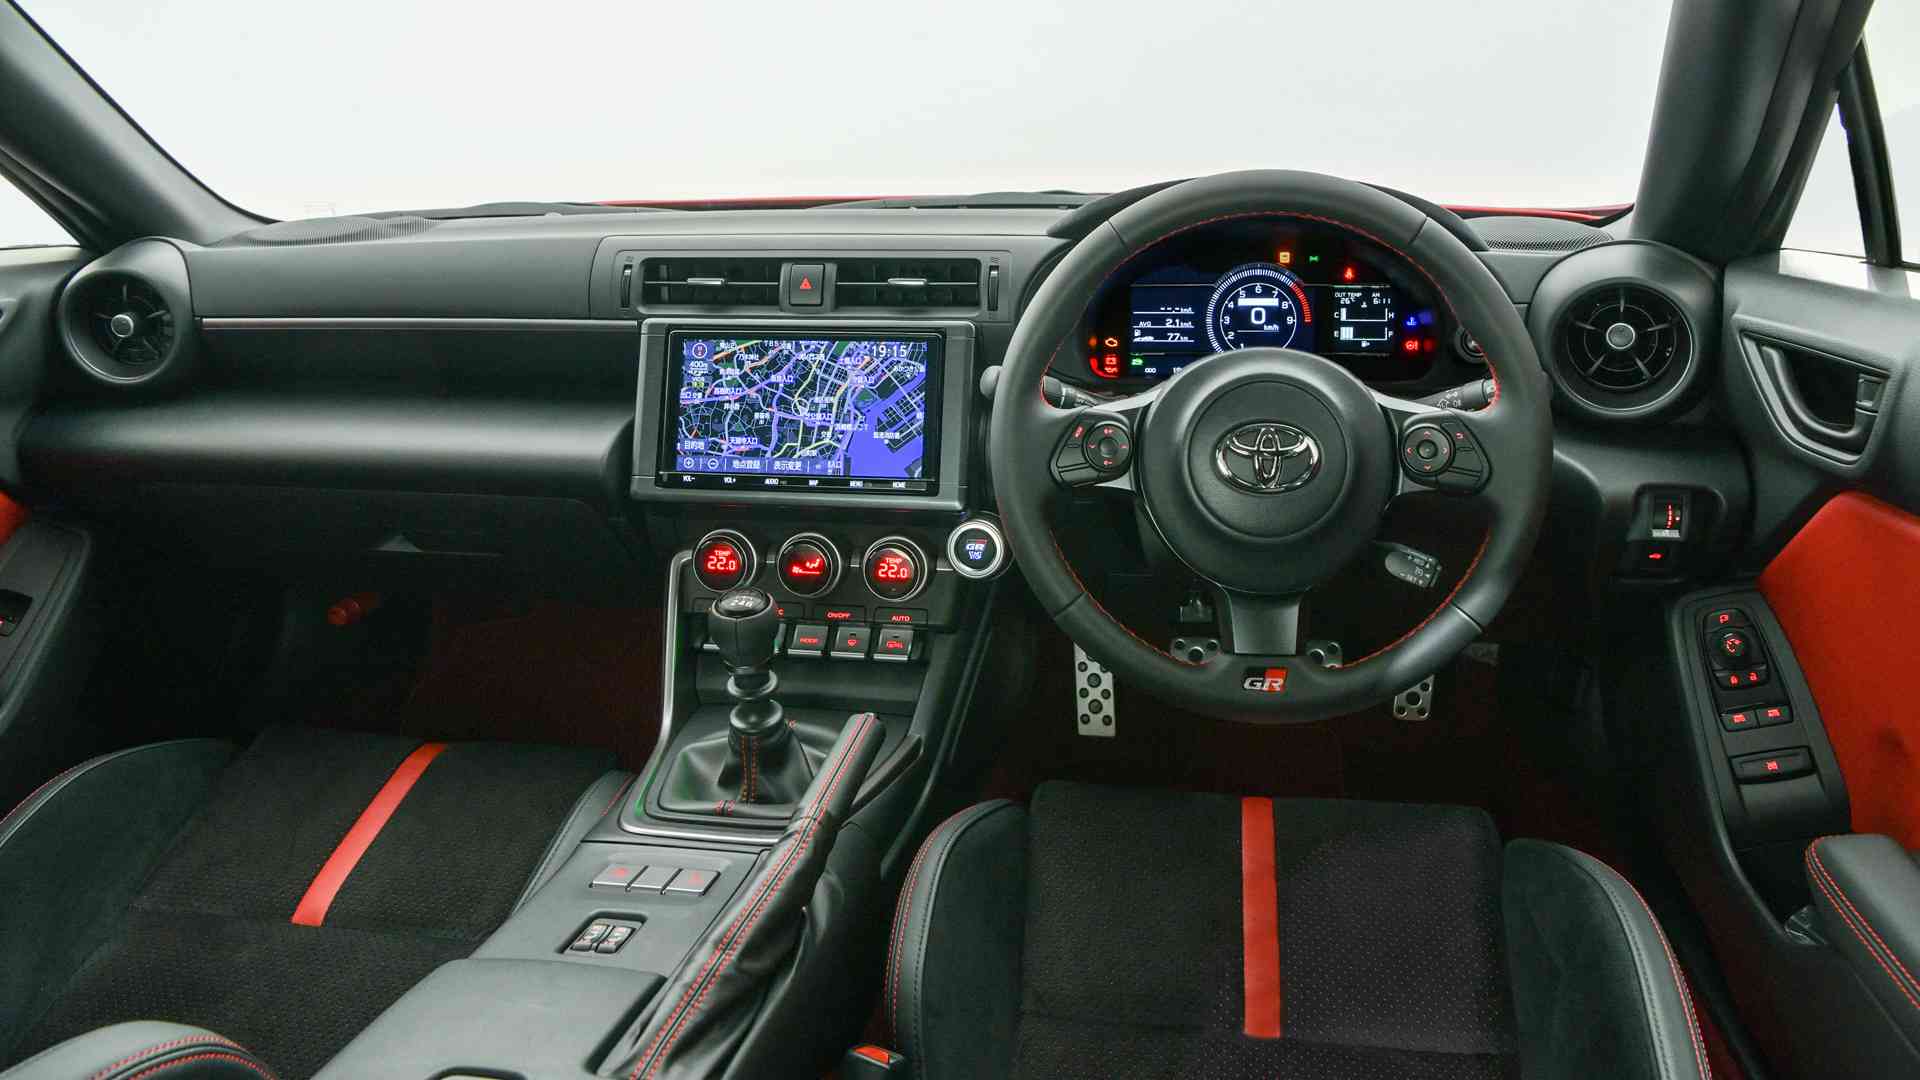 The Toyota GR 86 has a revised interior, and features a seven-inch touchscreen. Image: Toyota